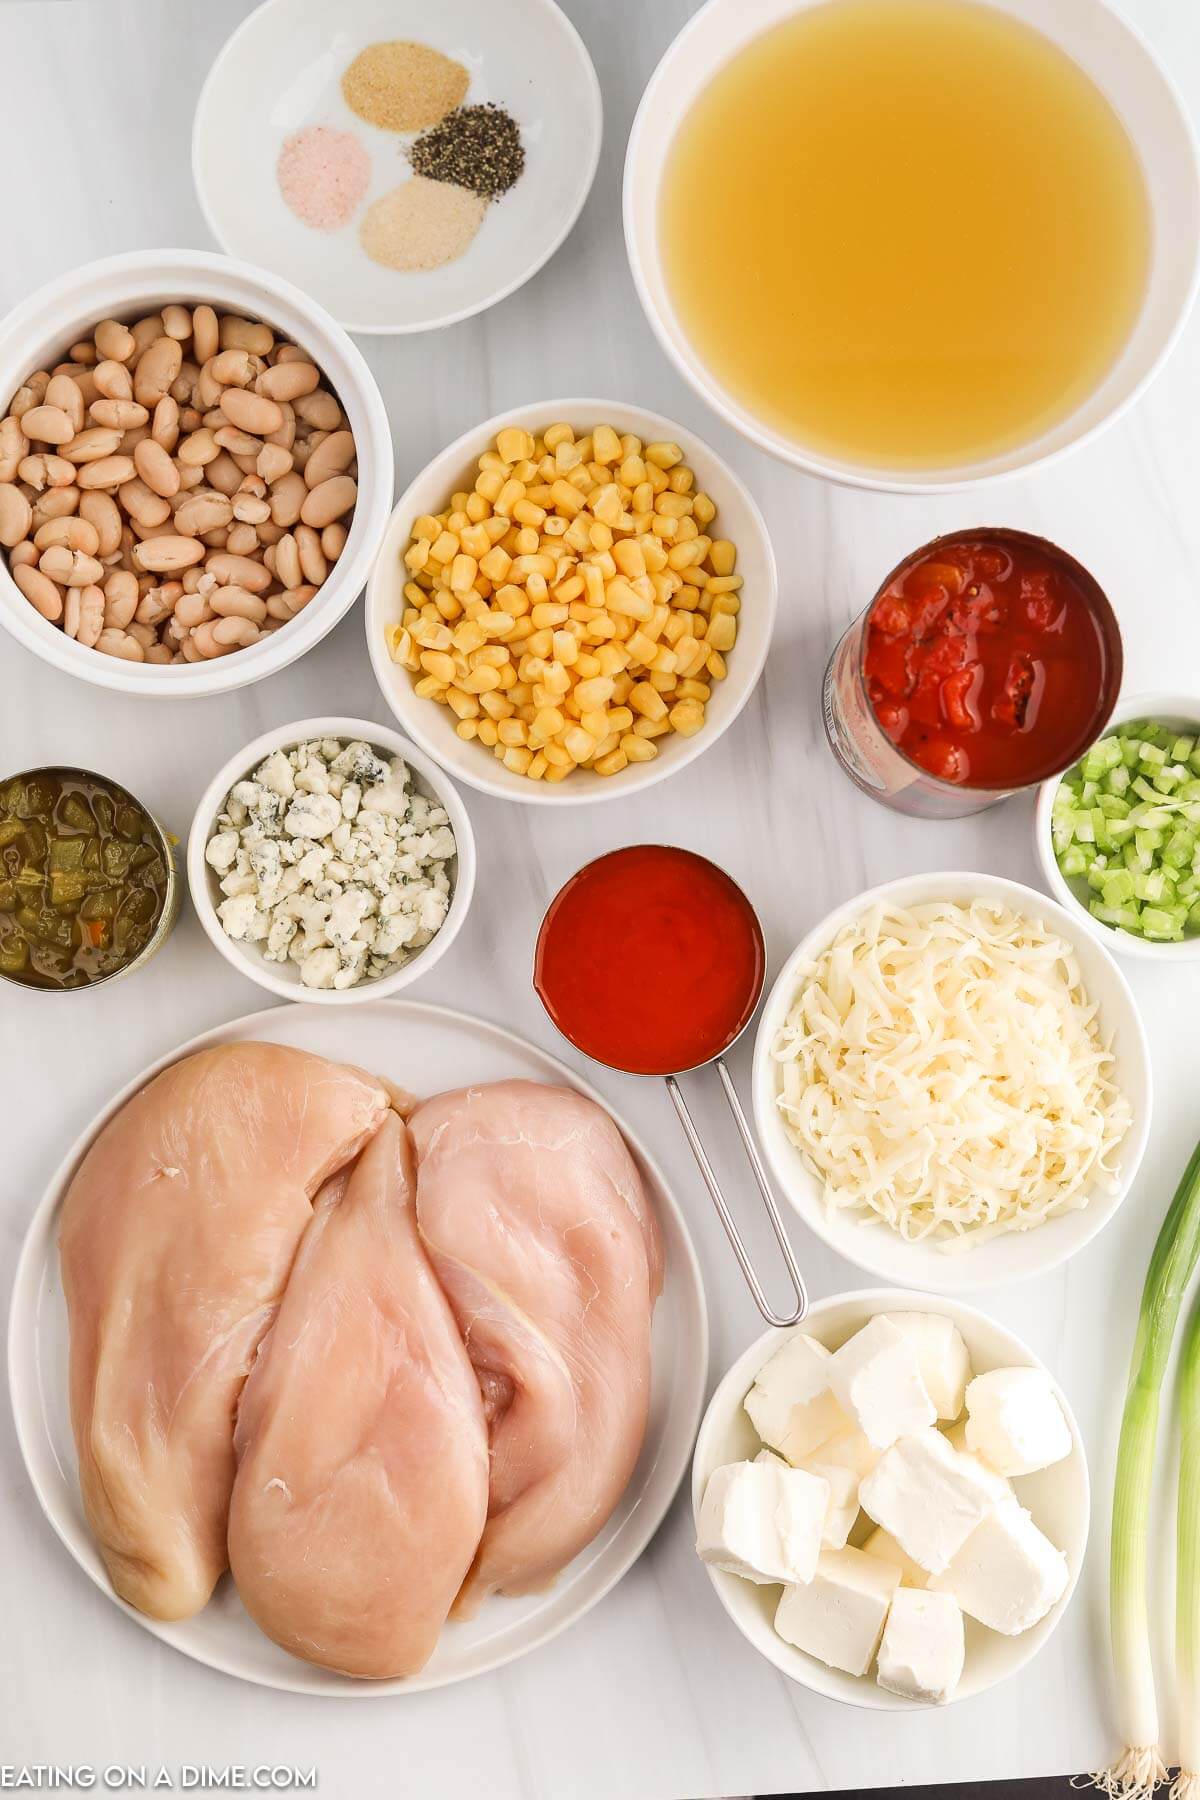 Ingredients needed - chicken breast, chicken broth, fire roasted diced tomatoes, green chiles, wing sauce, corn, celery, onion powder, pepper, salt, cream cheese, monterey jack cheese, blue cheese crumbles, green onions